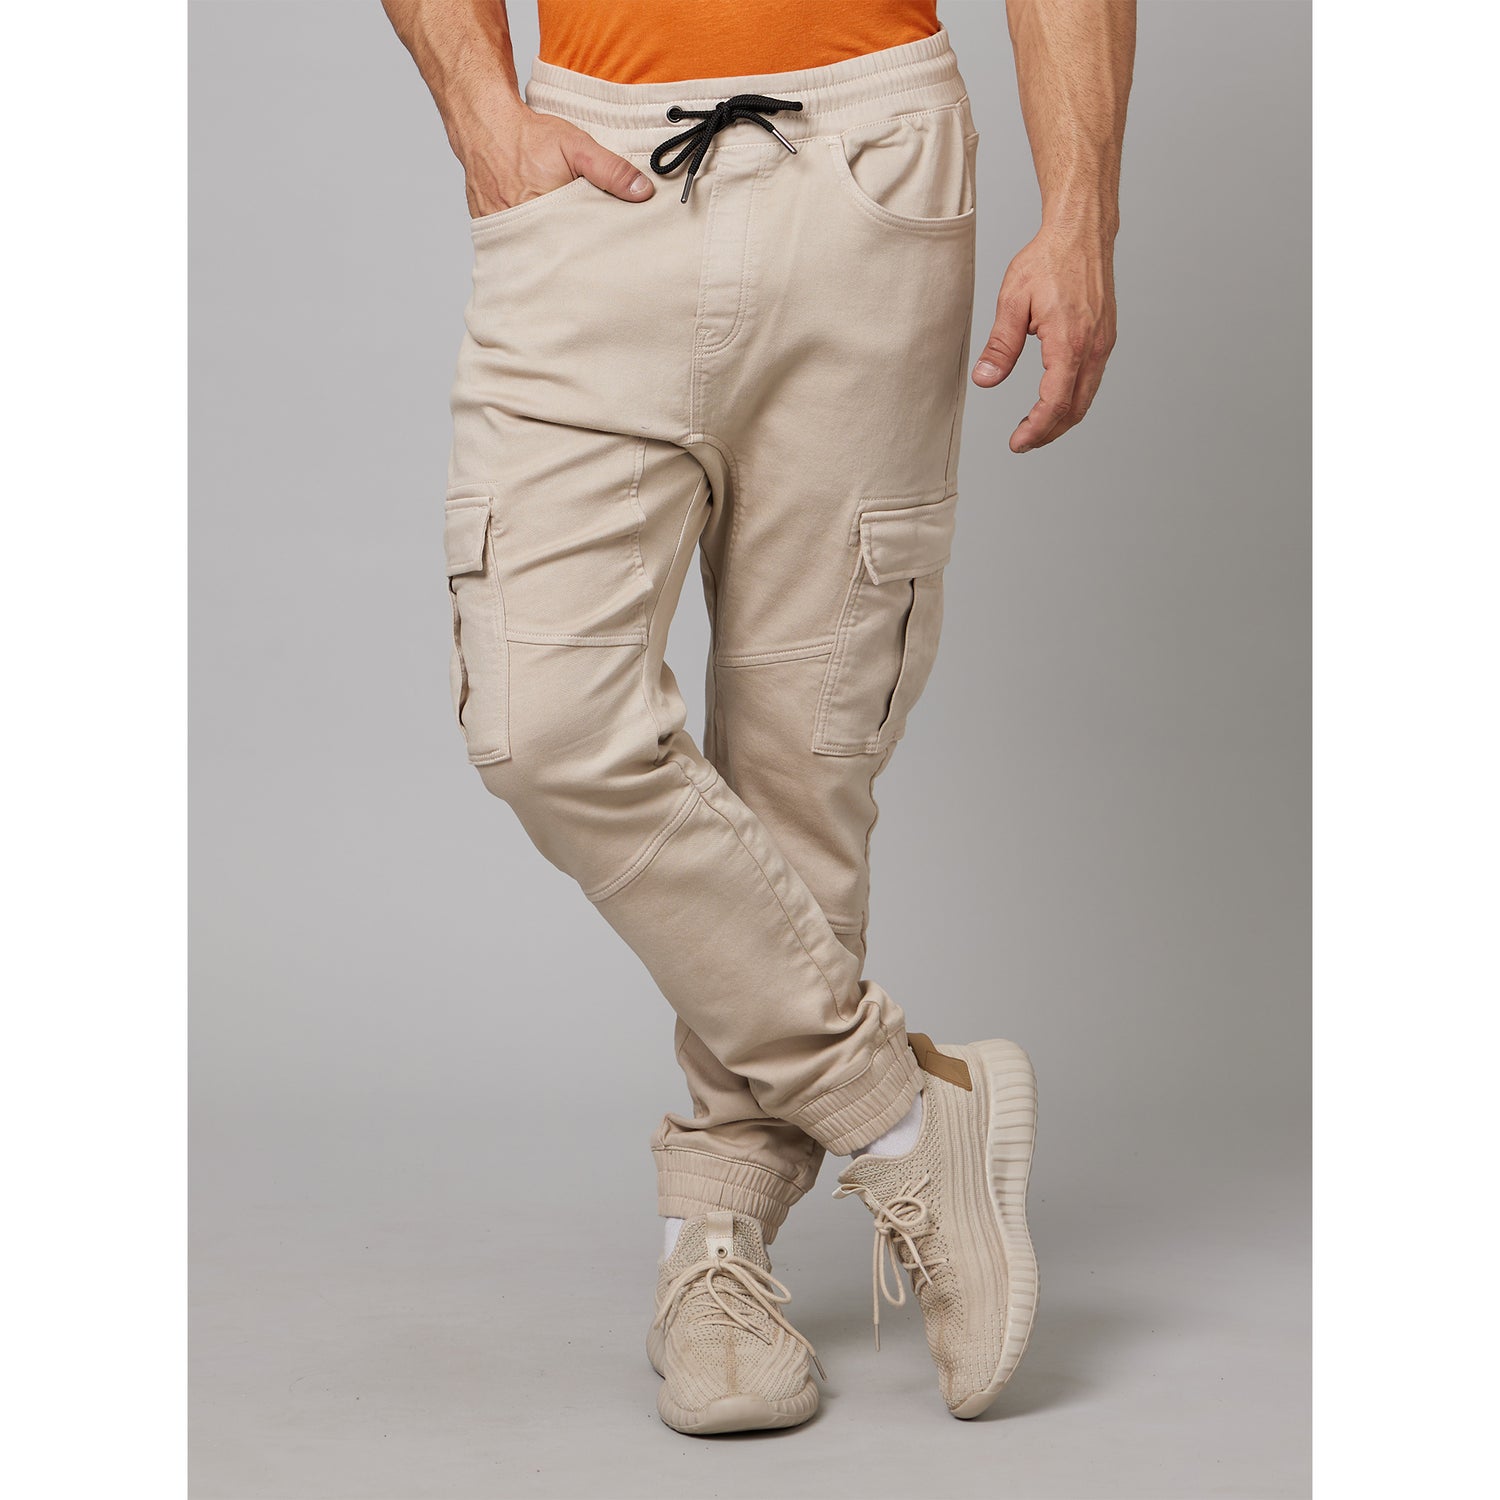 Buy Celio* men relax fit solid trouser pant beige Online | Brands For Less